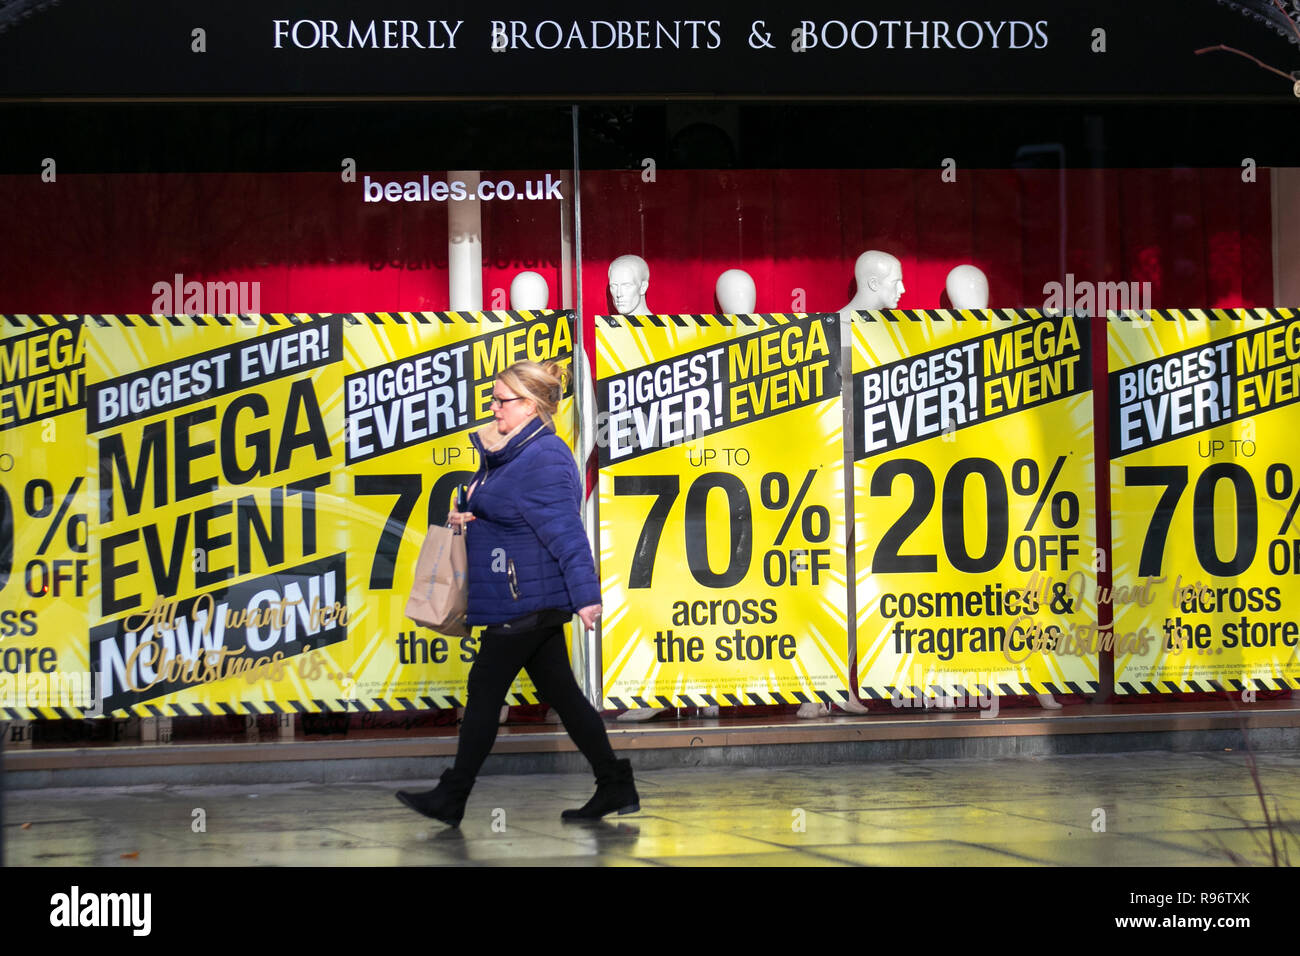 Southport, Merseyside, UK. 20th Dec, 2018. Wet & windy day for Beales Christmas shoppers as the Biggest Mega event ever sale signs go up in Beales retail outlets discounting items across the store in an attempt to stimulate festive high street sales. Credit: MediaWorldImages/Alamy Live News Stock Photo